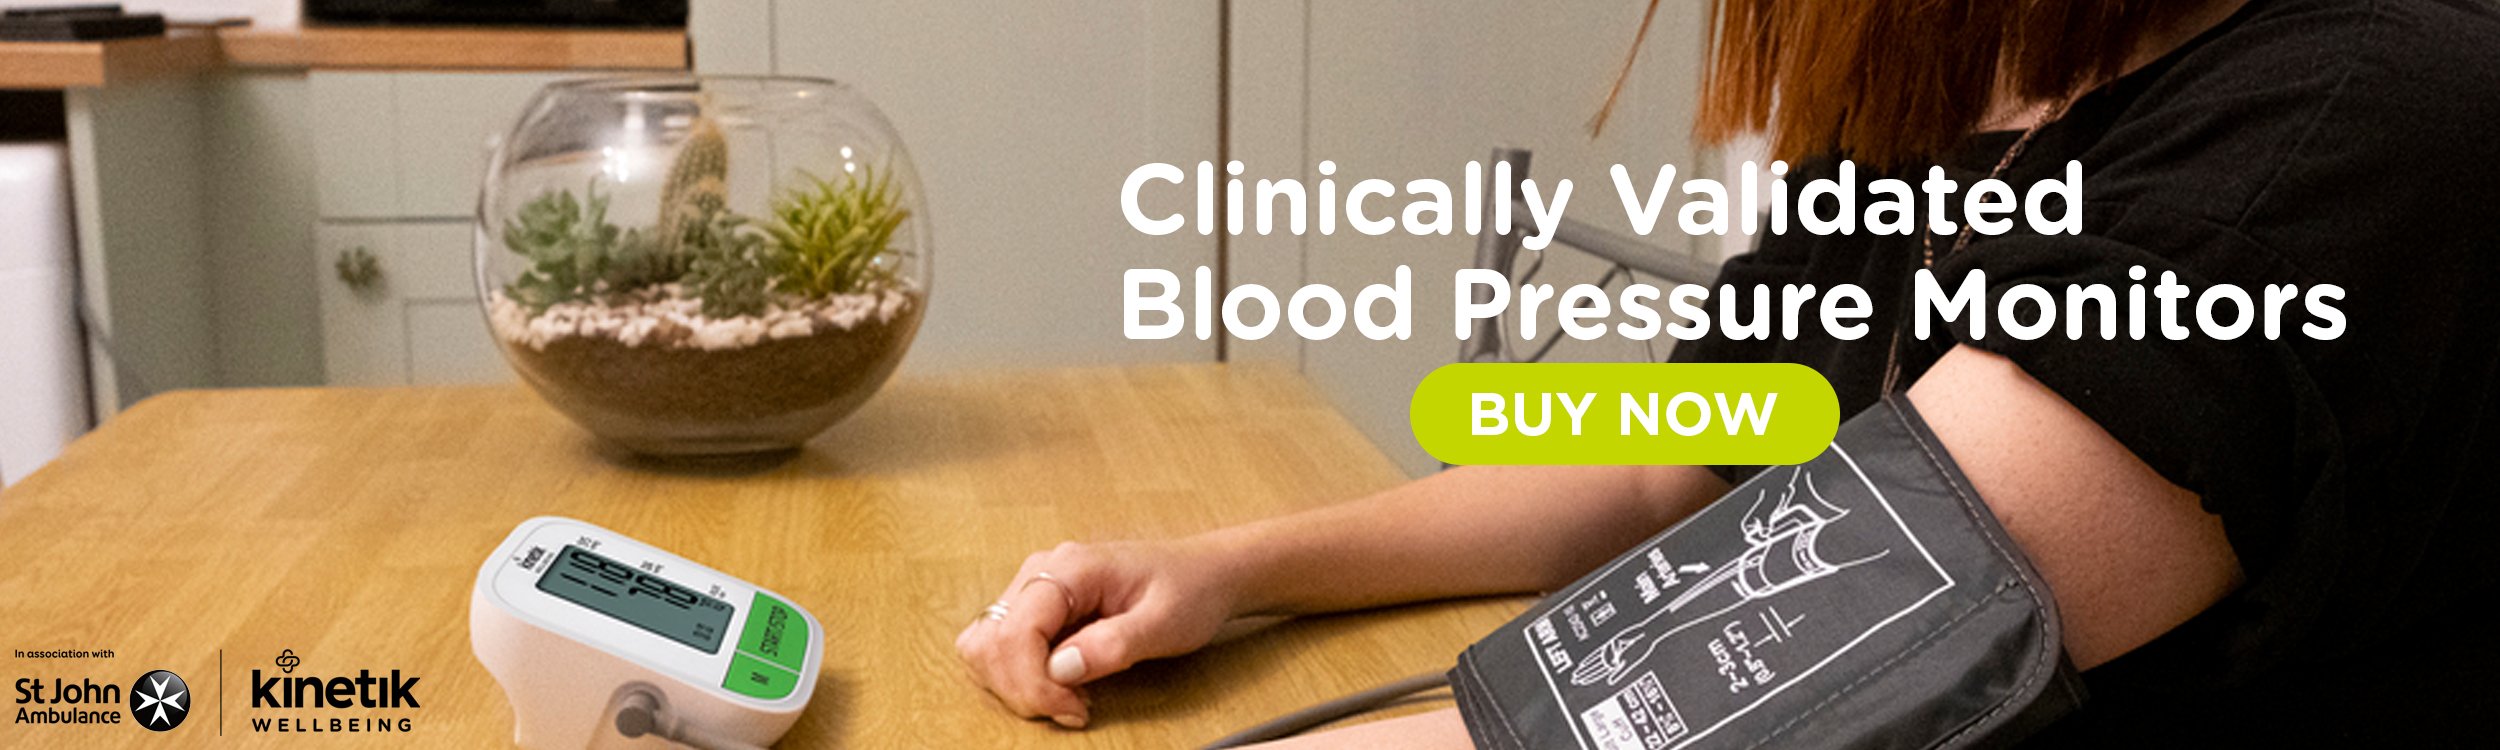 Clinically Validated Blood Pressure Monitors